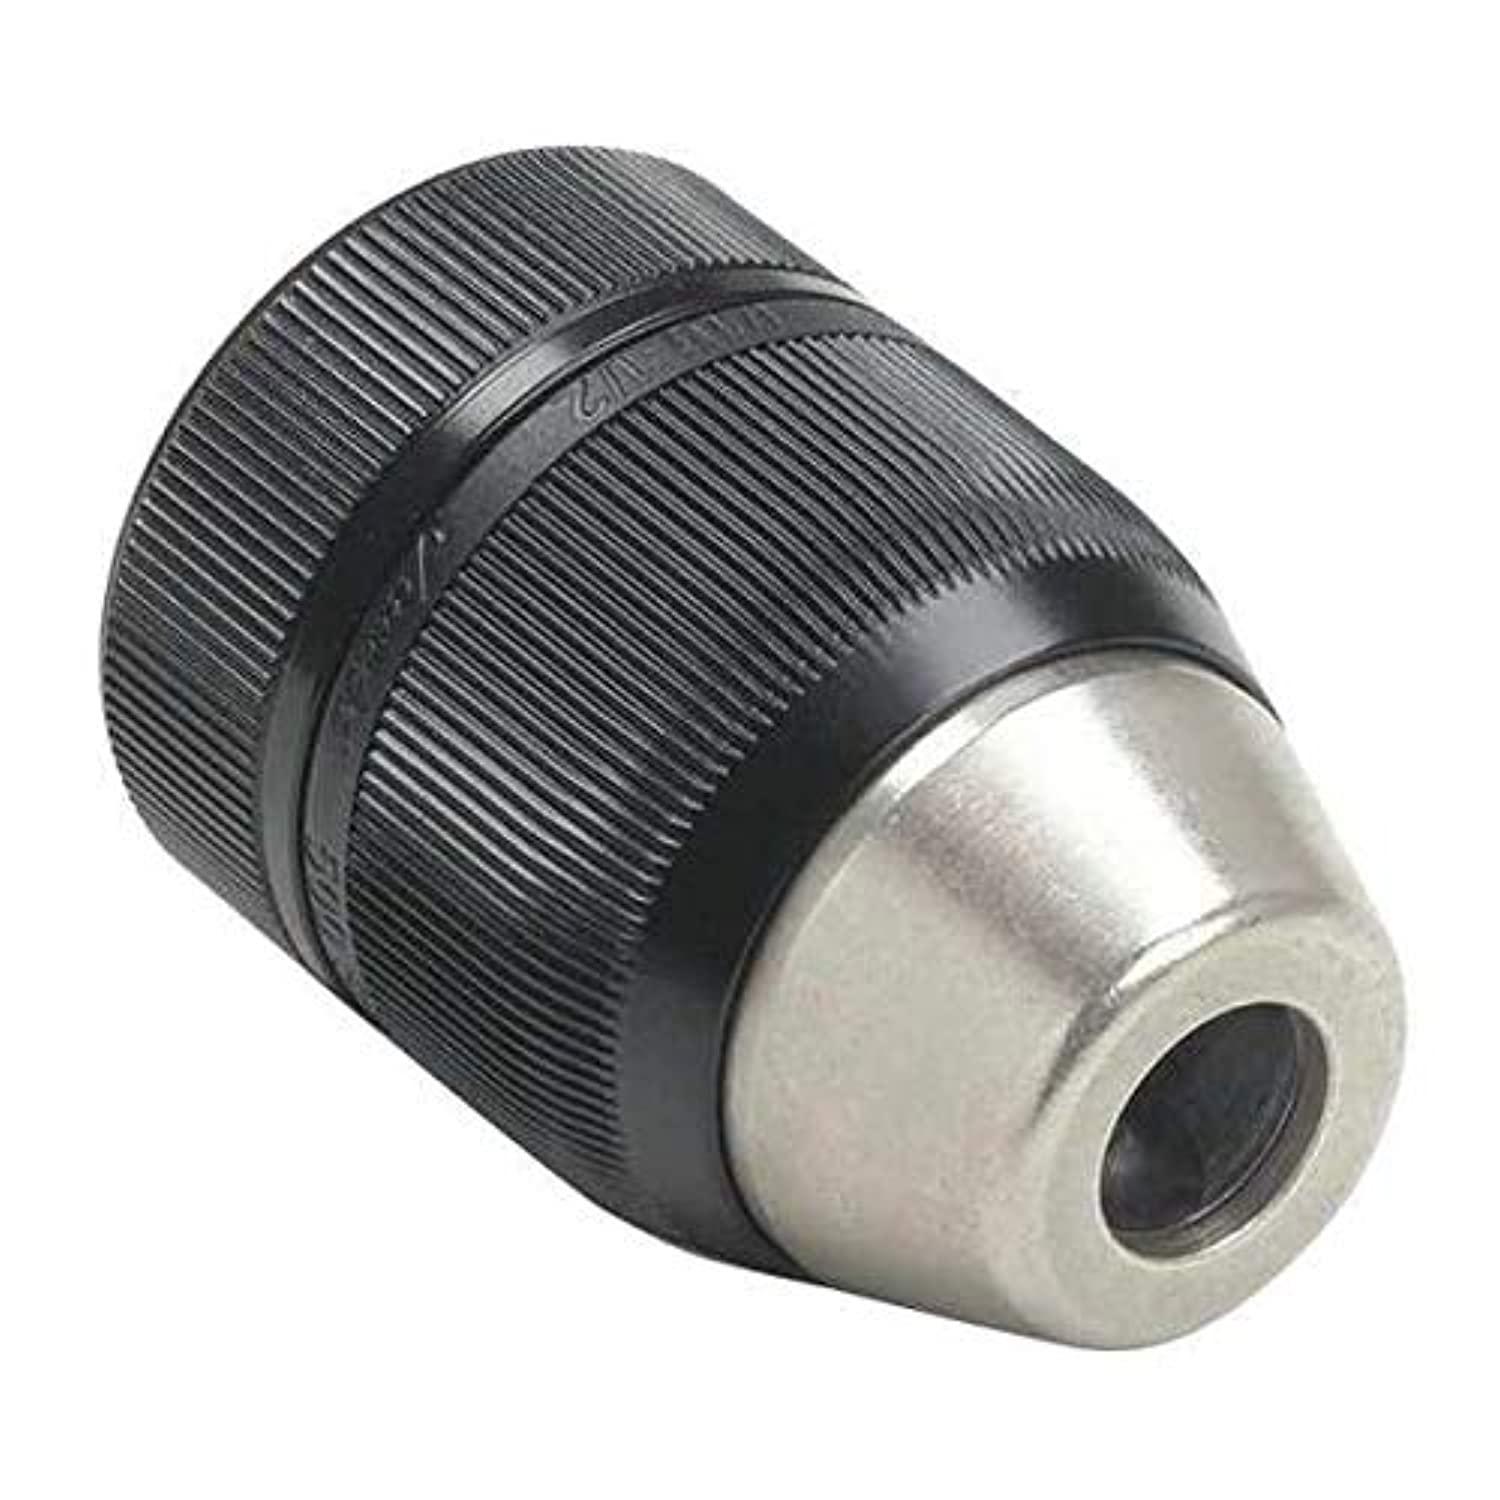 Jacobs 13mm (1/2") capacity hand-tite keyless drill chuck with 3/8-24 mount